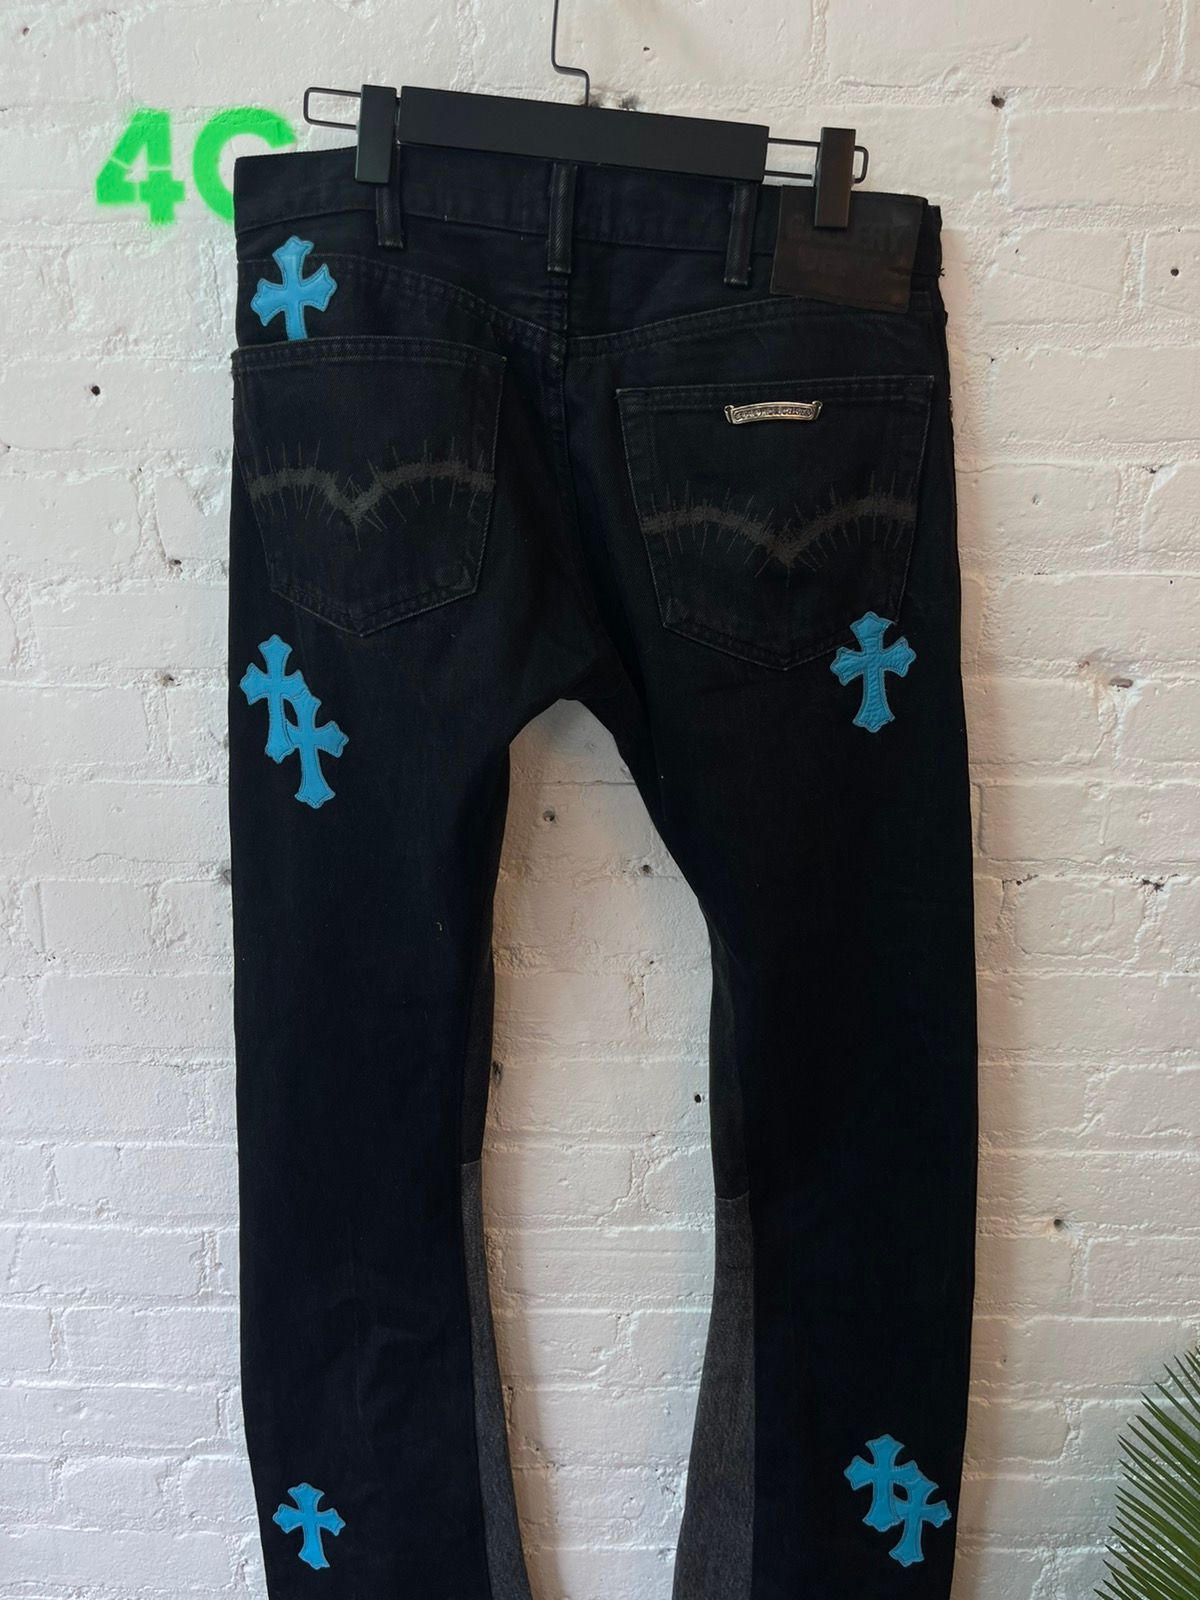 Chrome Hearts VIRGIL’S PERSONAL Cross Jeans TURQUOISE / BLACK